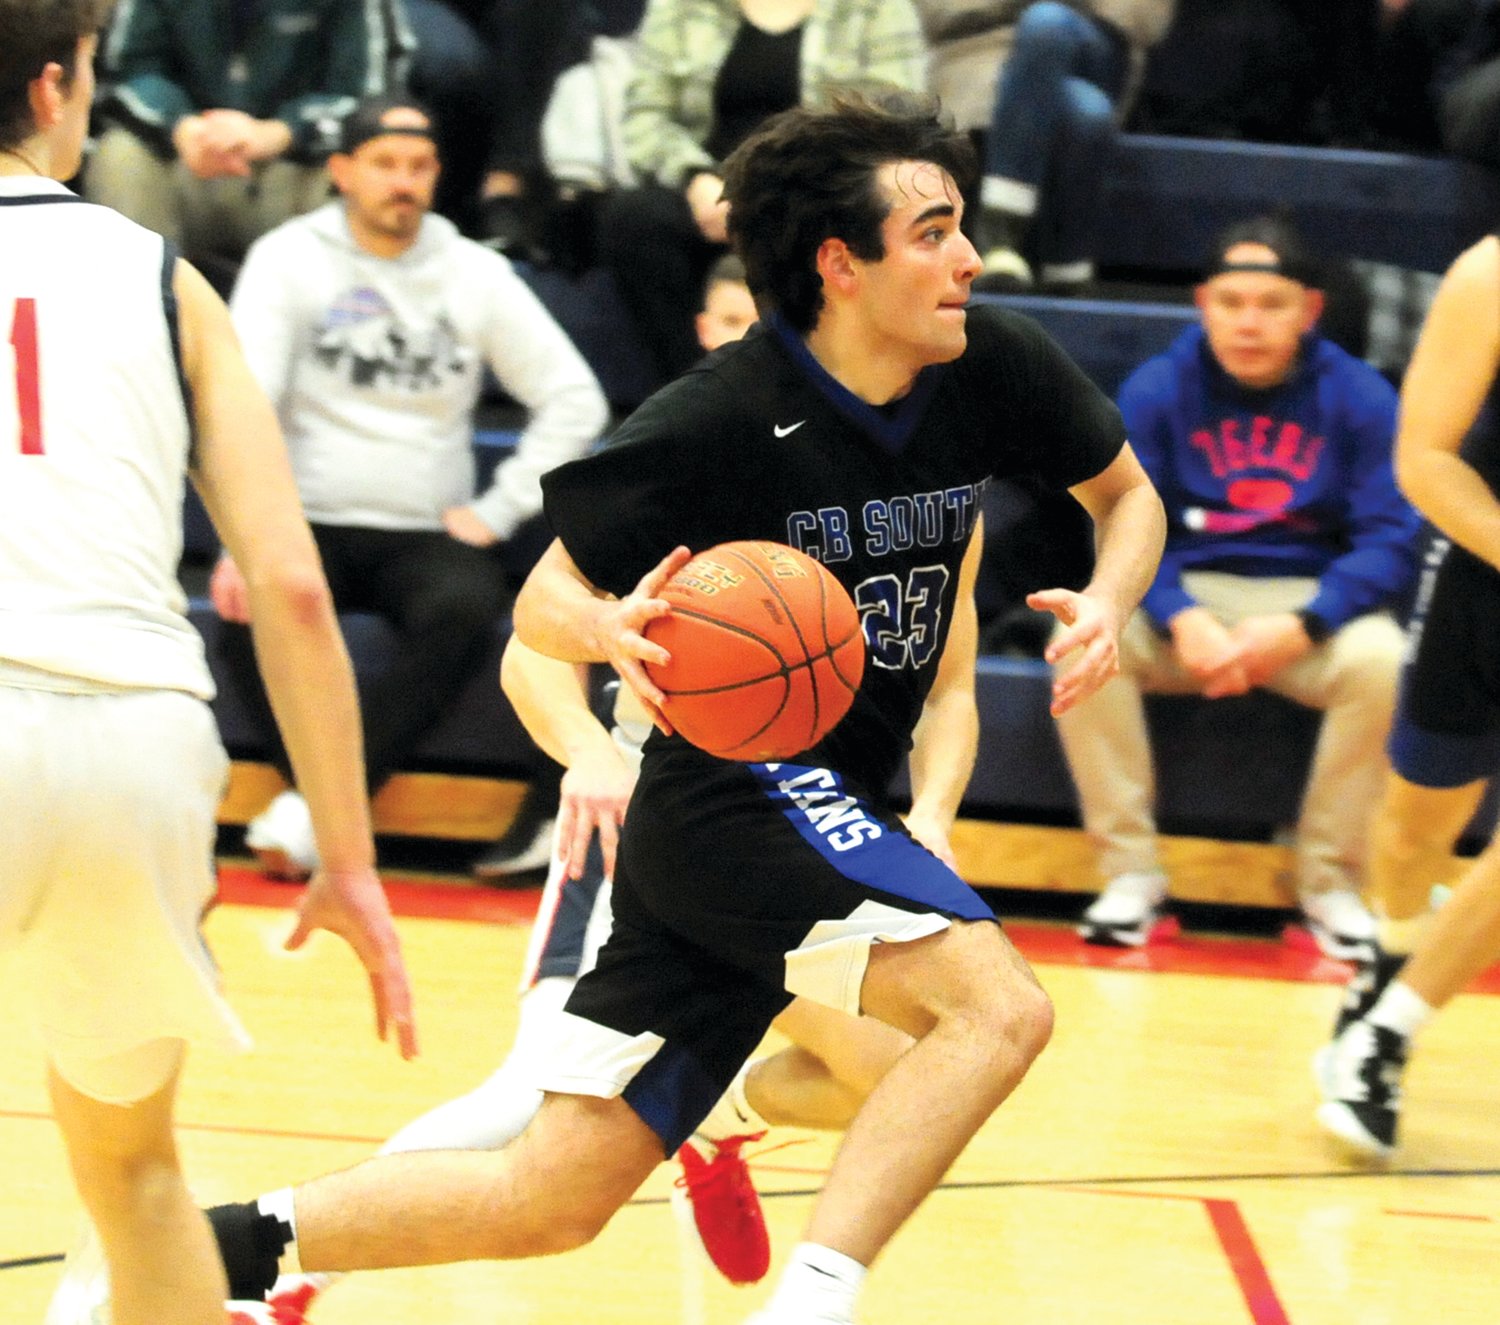 Steve Sherman
CB South senior Chris Granito drives the lane for the Titans in Jan. 27 skirmish with CB East won by the Patriots in overtime.